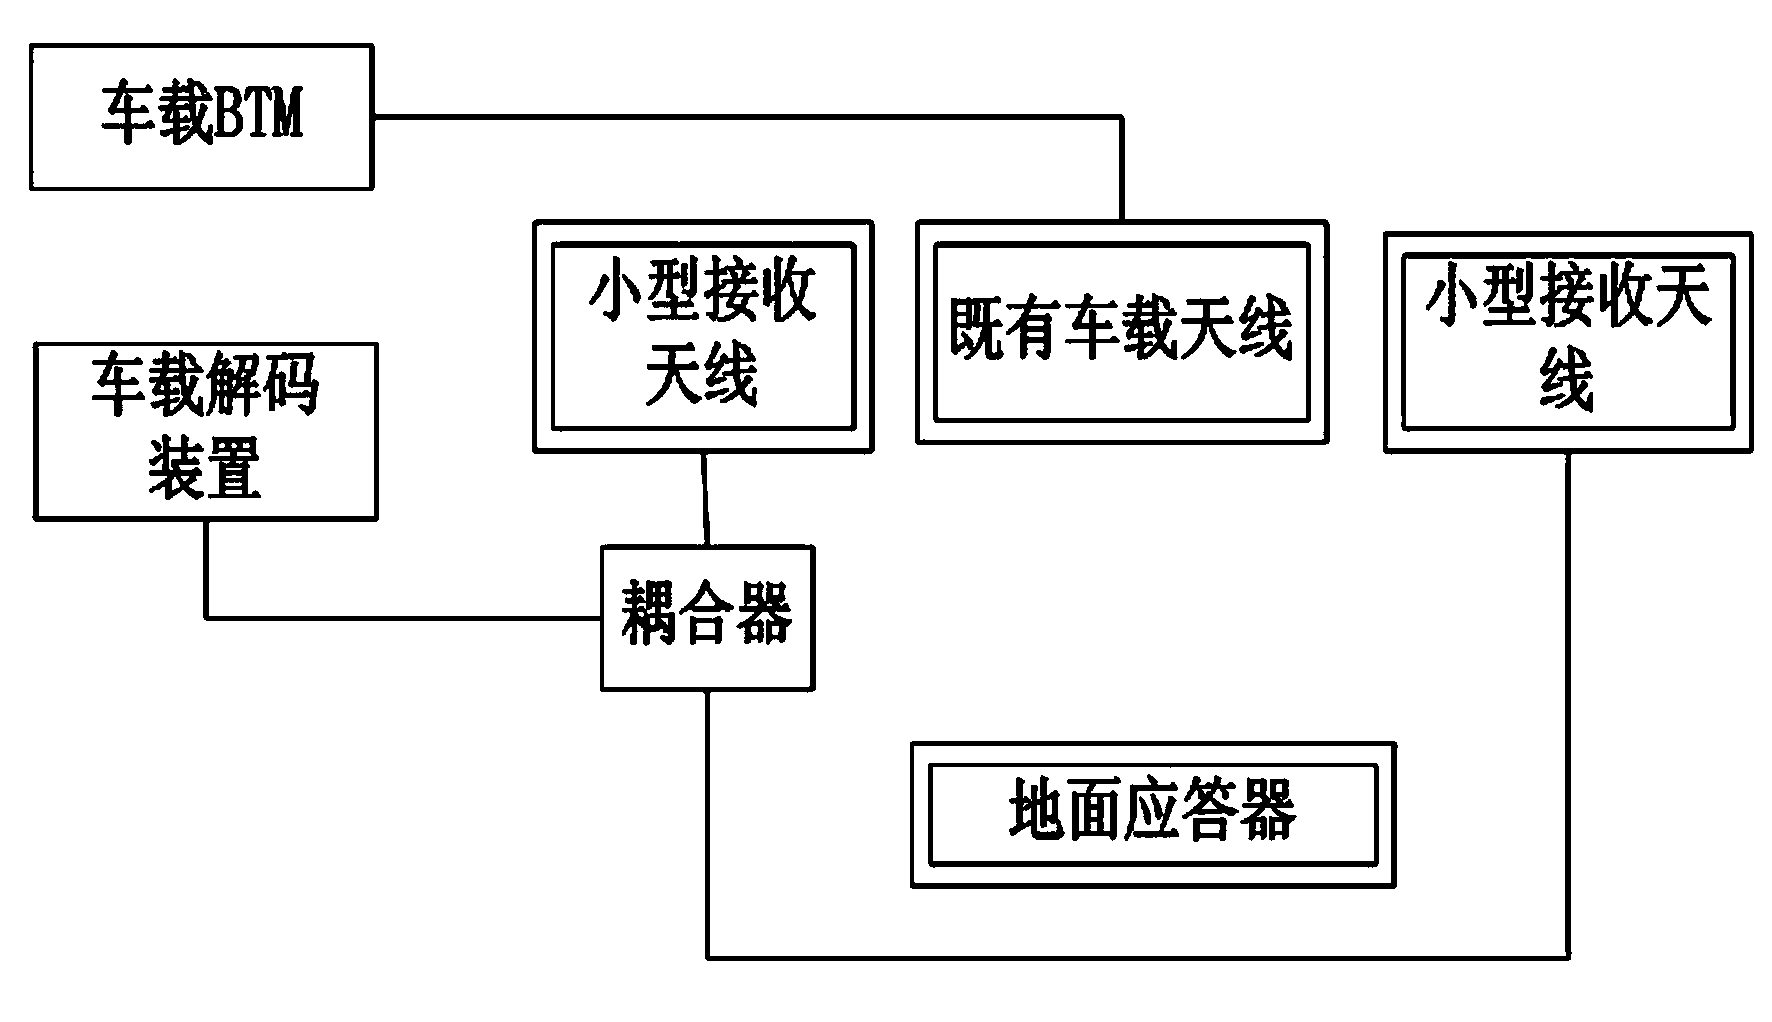 Balise message detection method and third-party balise message reading device